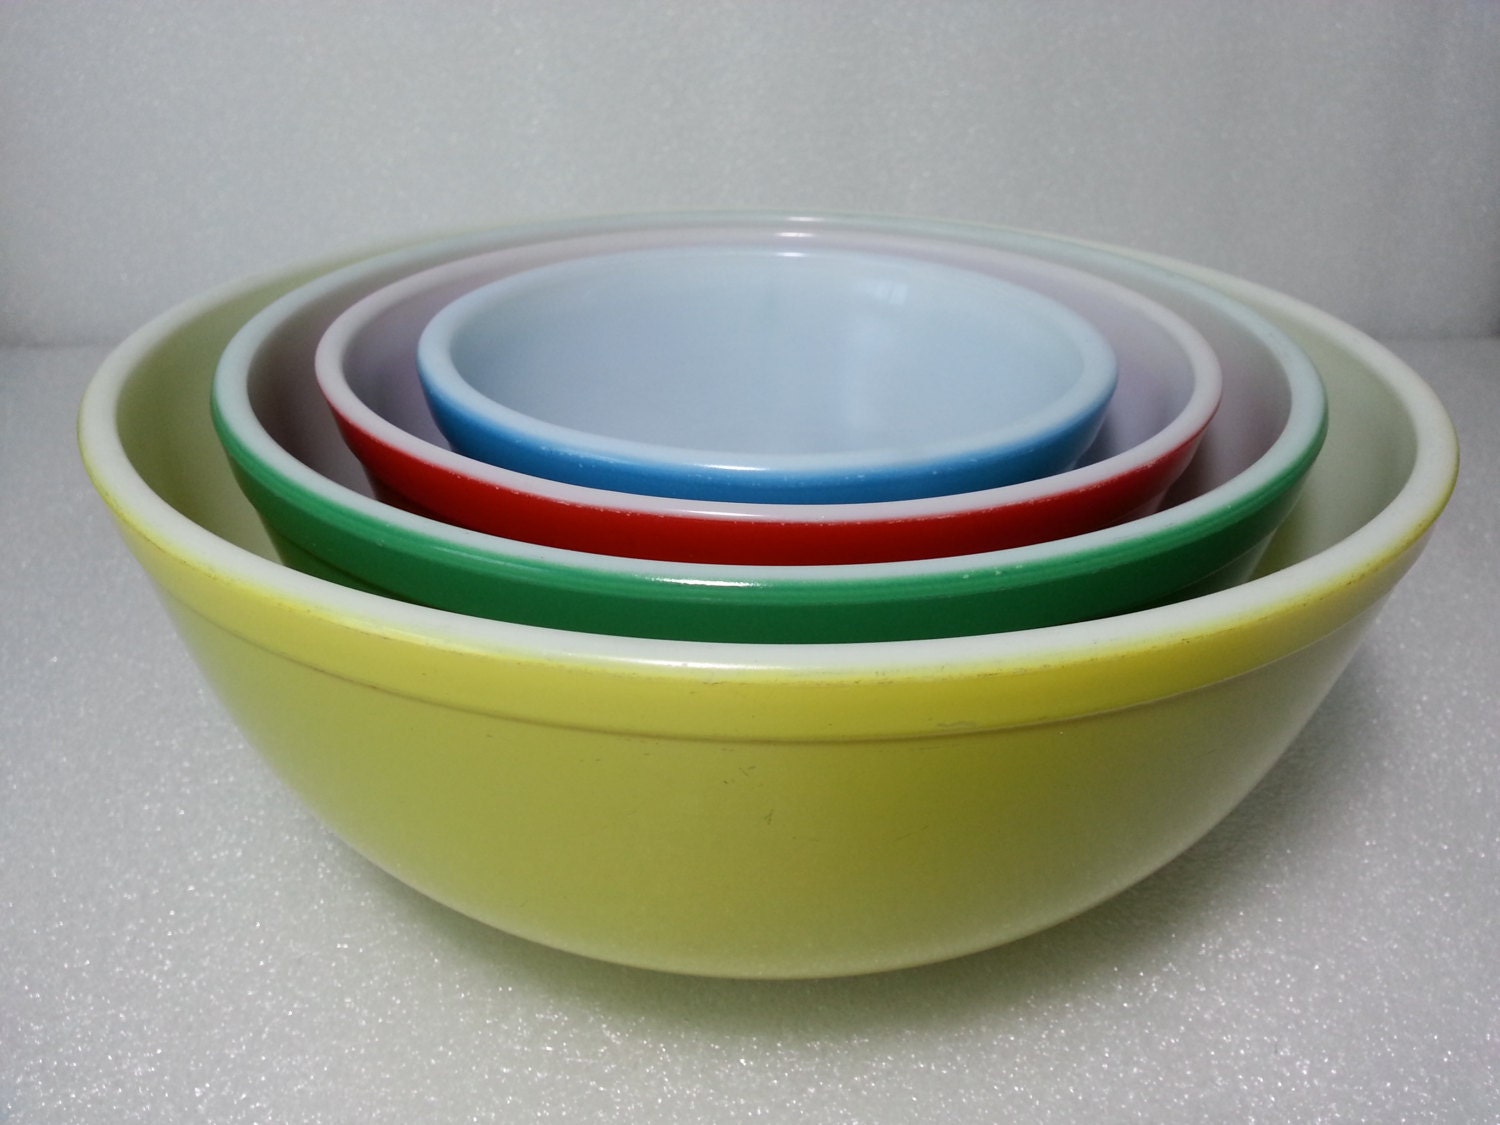 Vintage Pyrex Nesting Bowls in Primary Colors - 400 Series